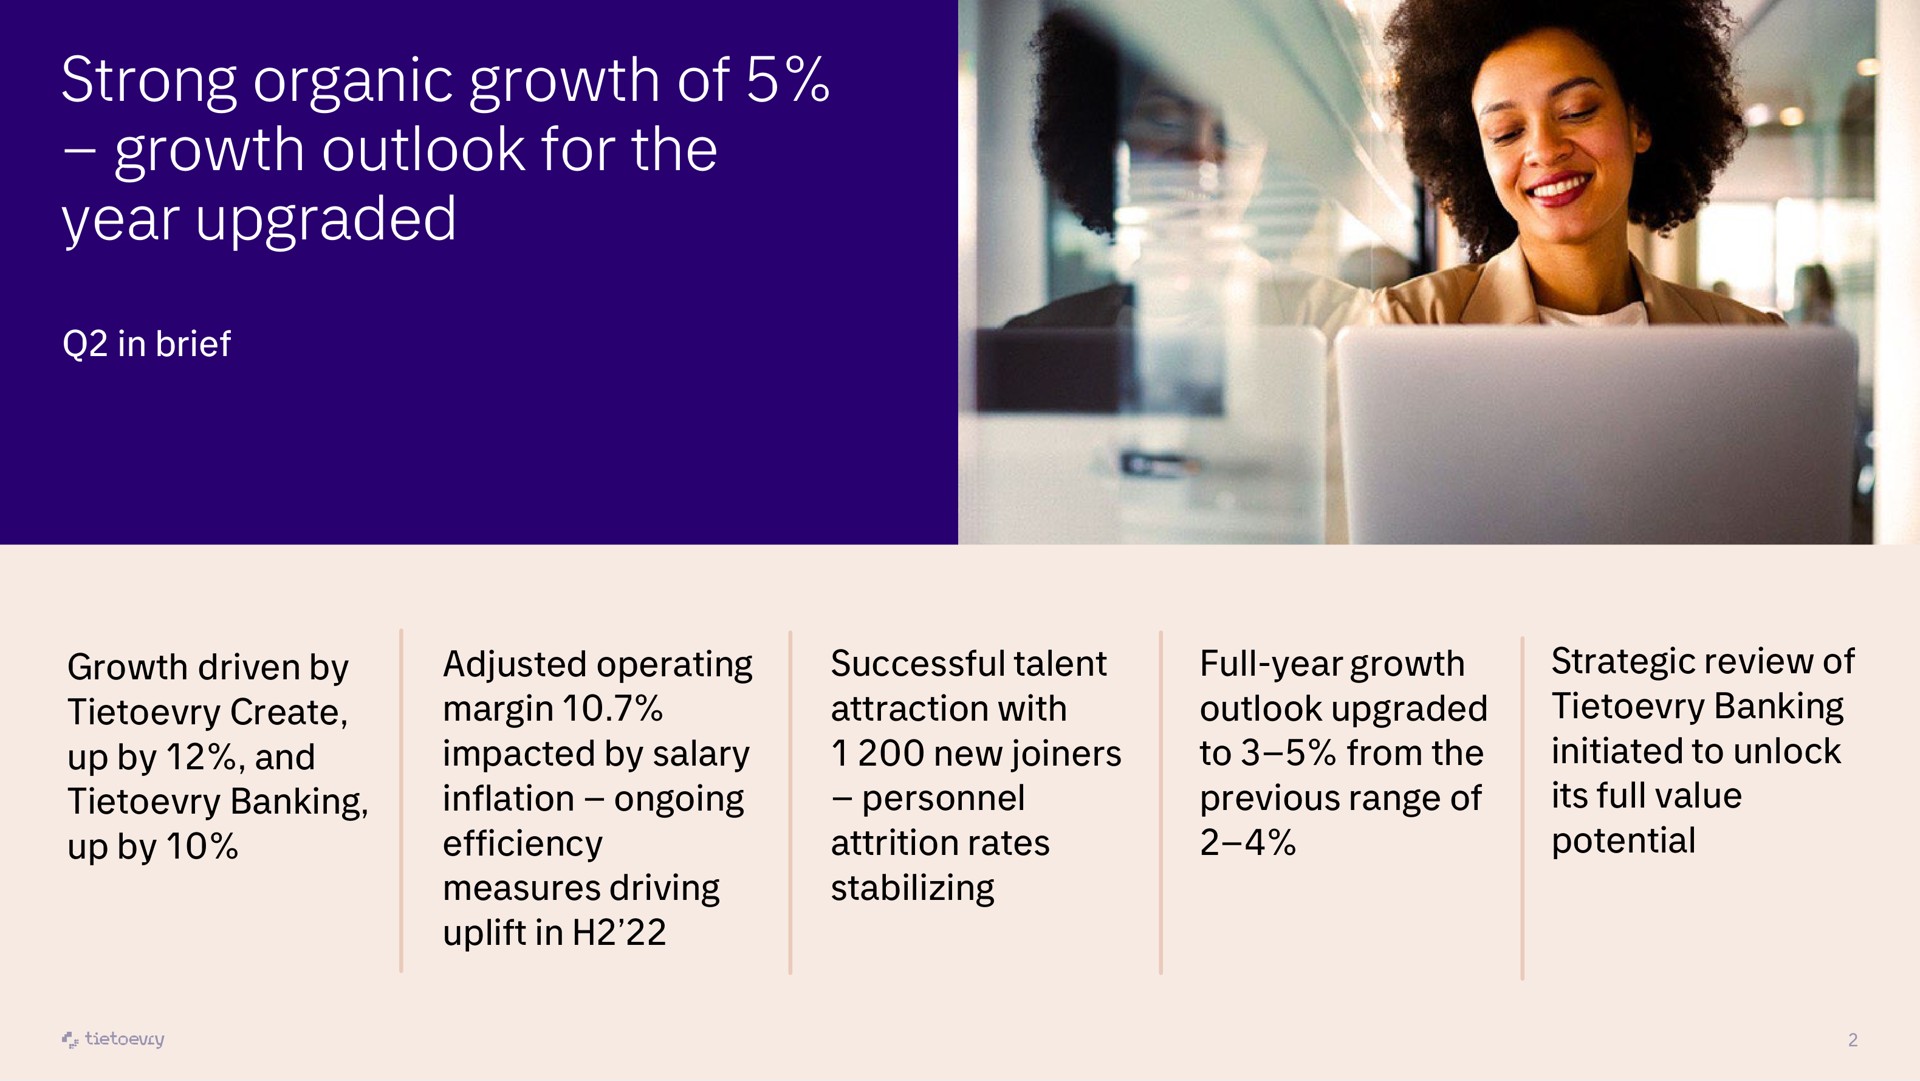 strong organic growth of growth outlook for the year upgraded | Tietoevry